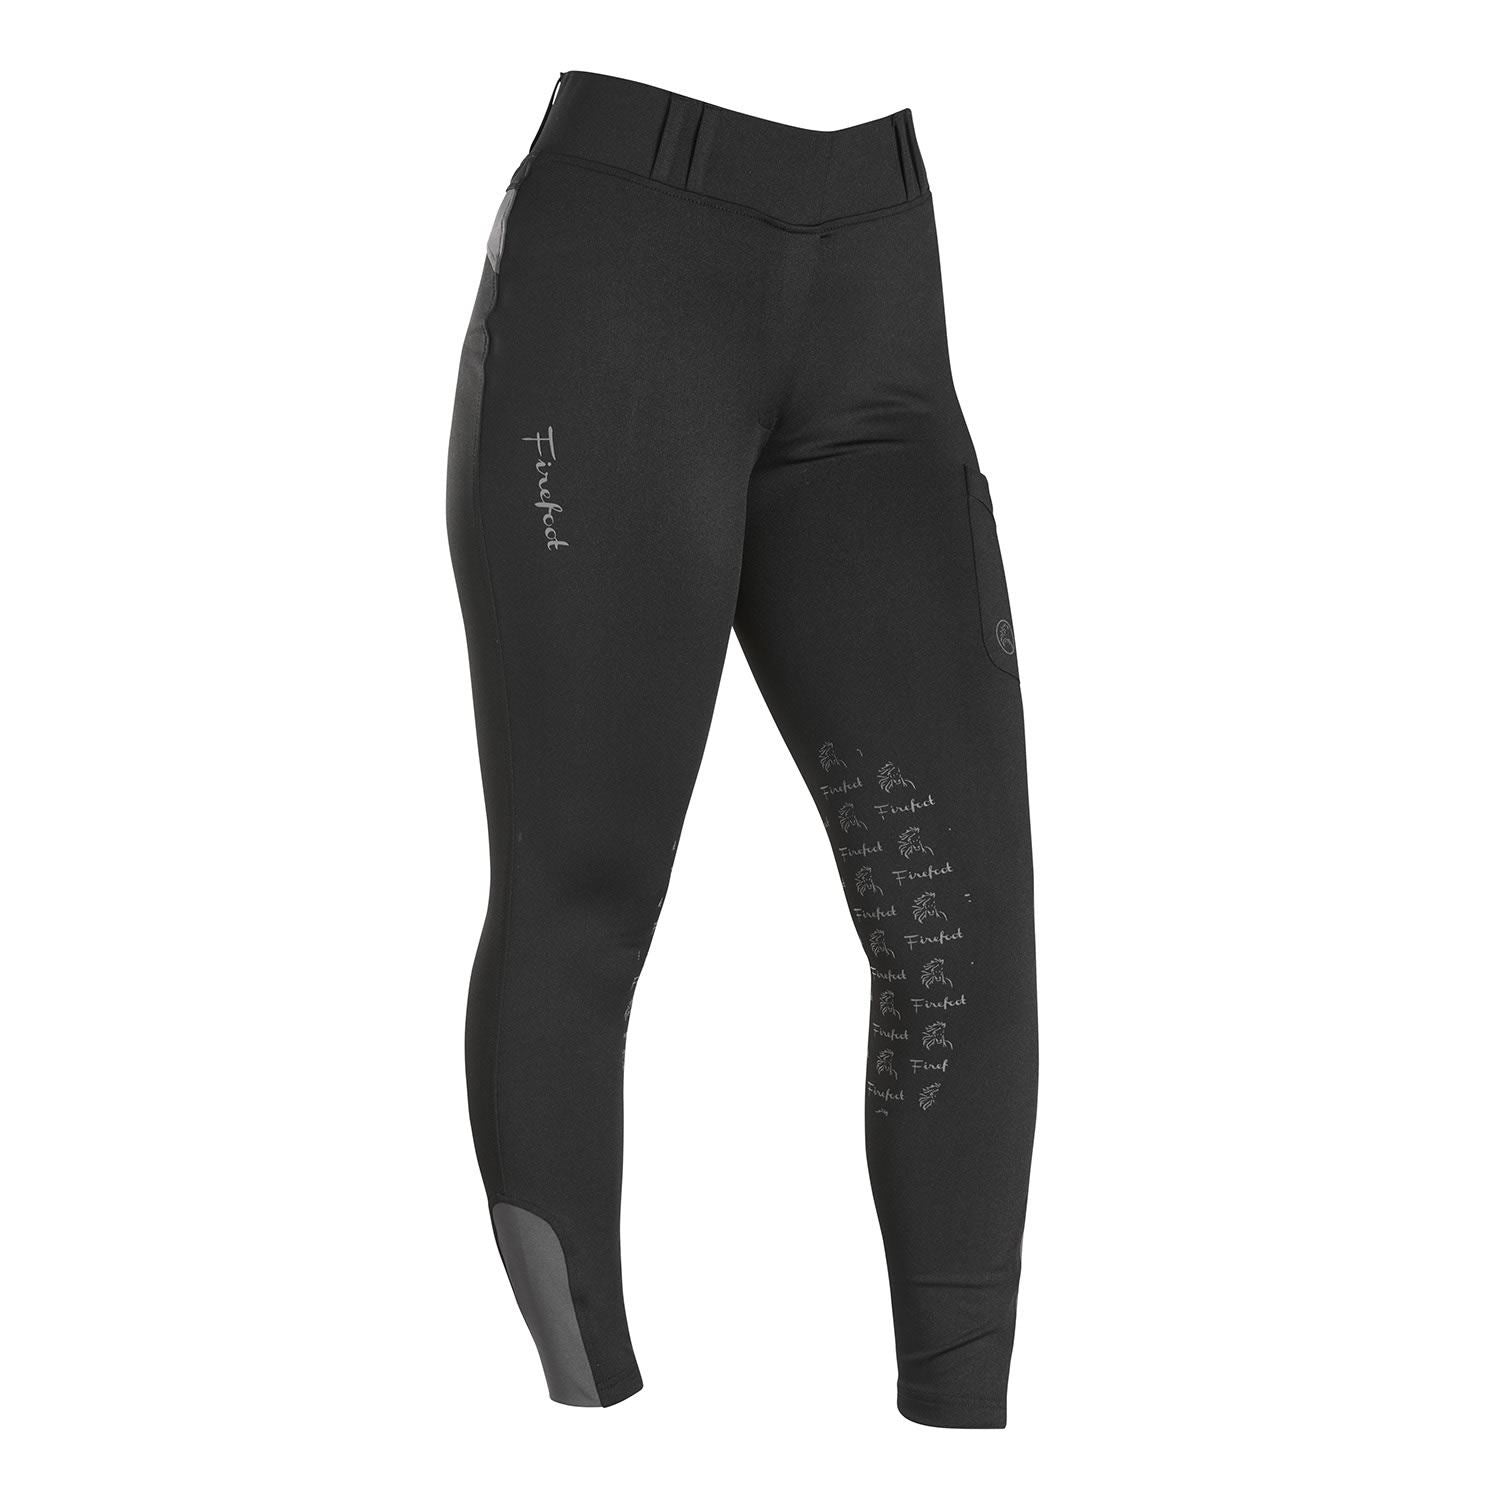 Firefoot Bankfield Basic Breeches Ladies - Just Horse Riders